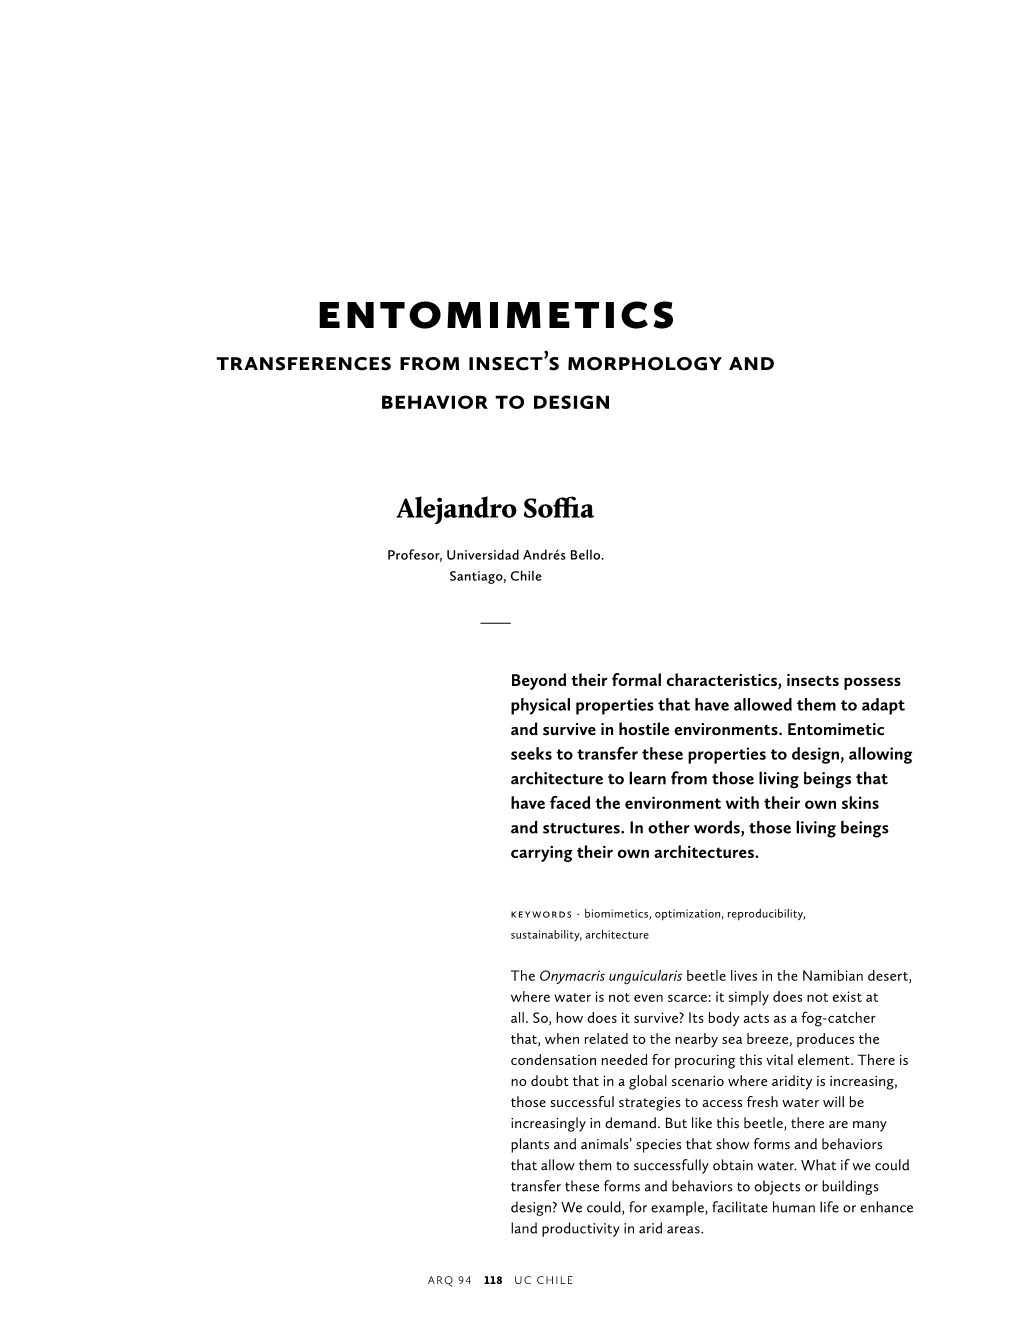 Entomimetics”2 the Technological Transfer That Is Based On